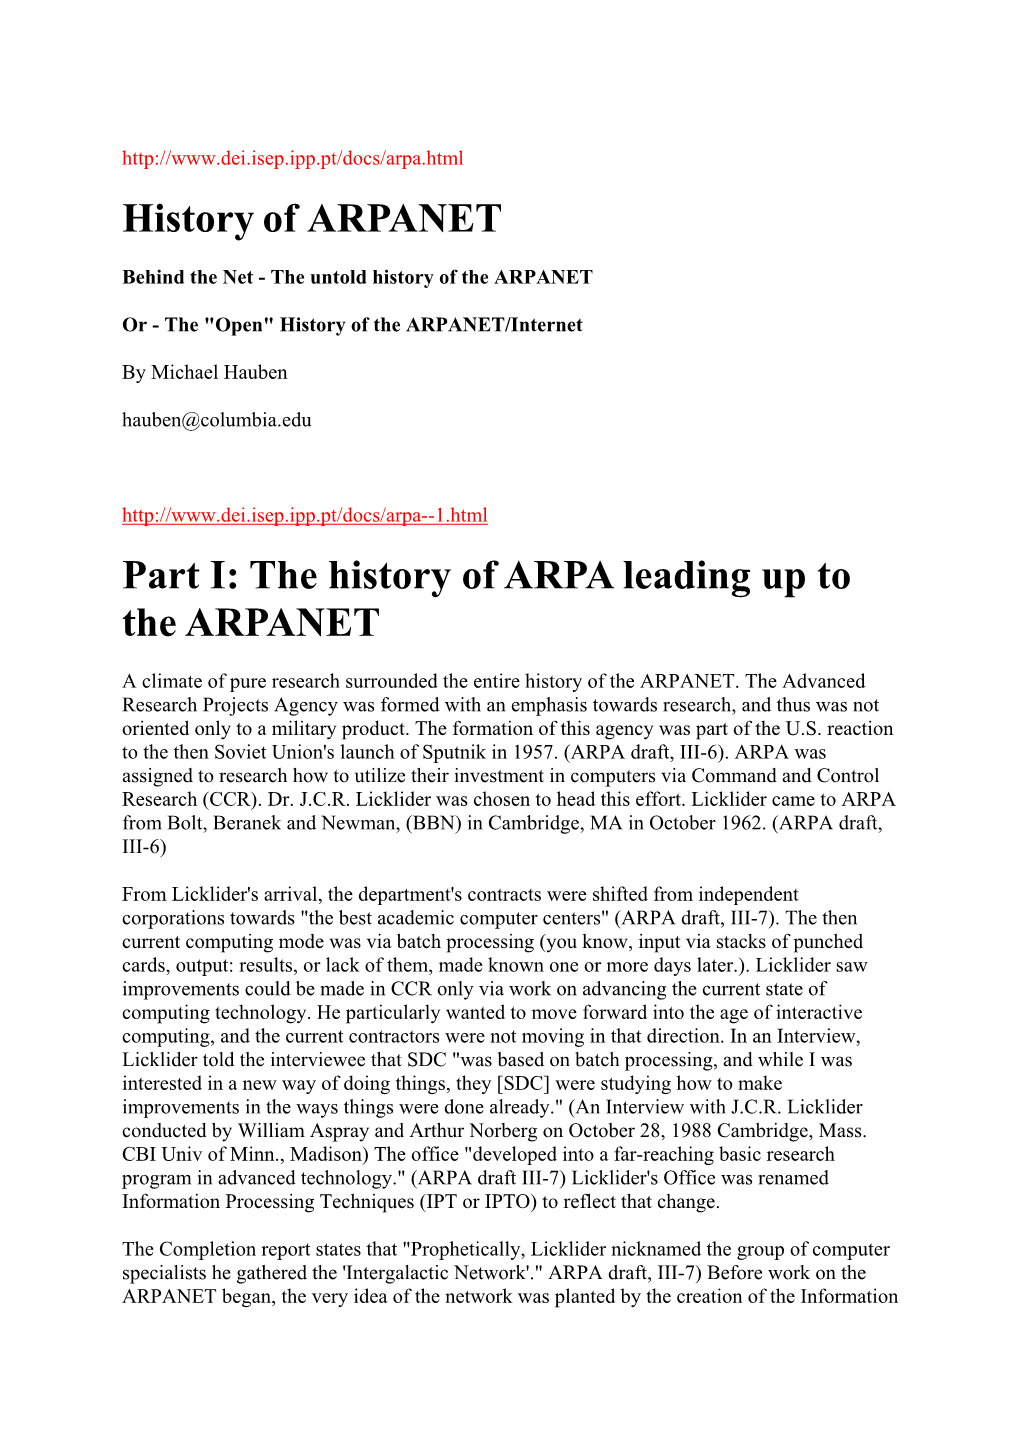 History of ARPANET Part I: the History of ARPA Leading up to the ARPANET